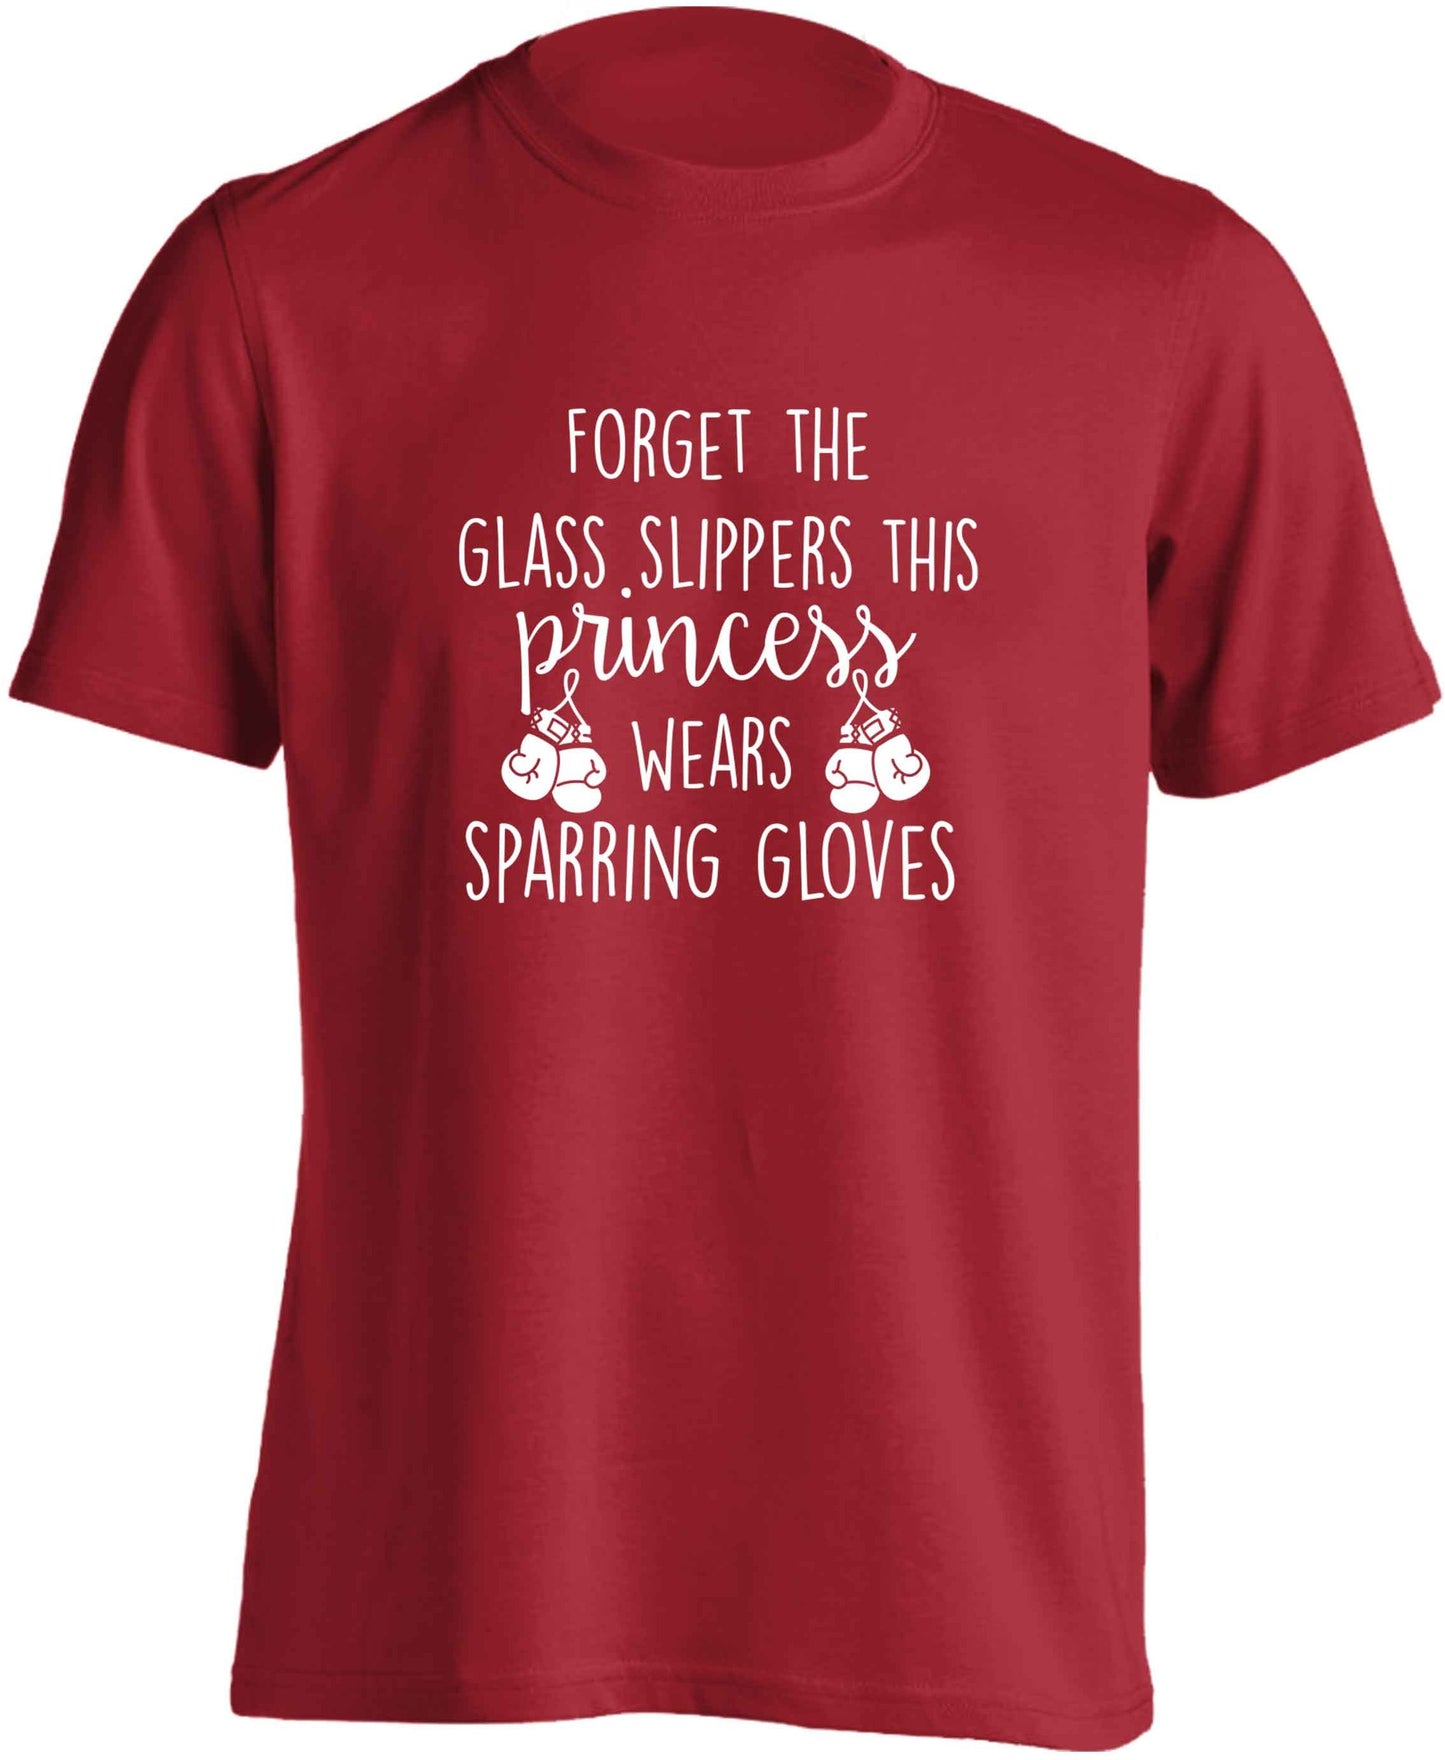 Forget the glass slippers this princess wears sparring gloves adults unisex red Tshirt 2XL